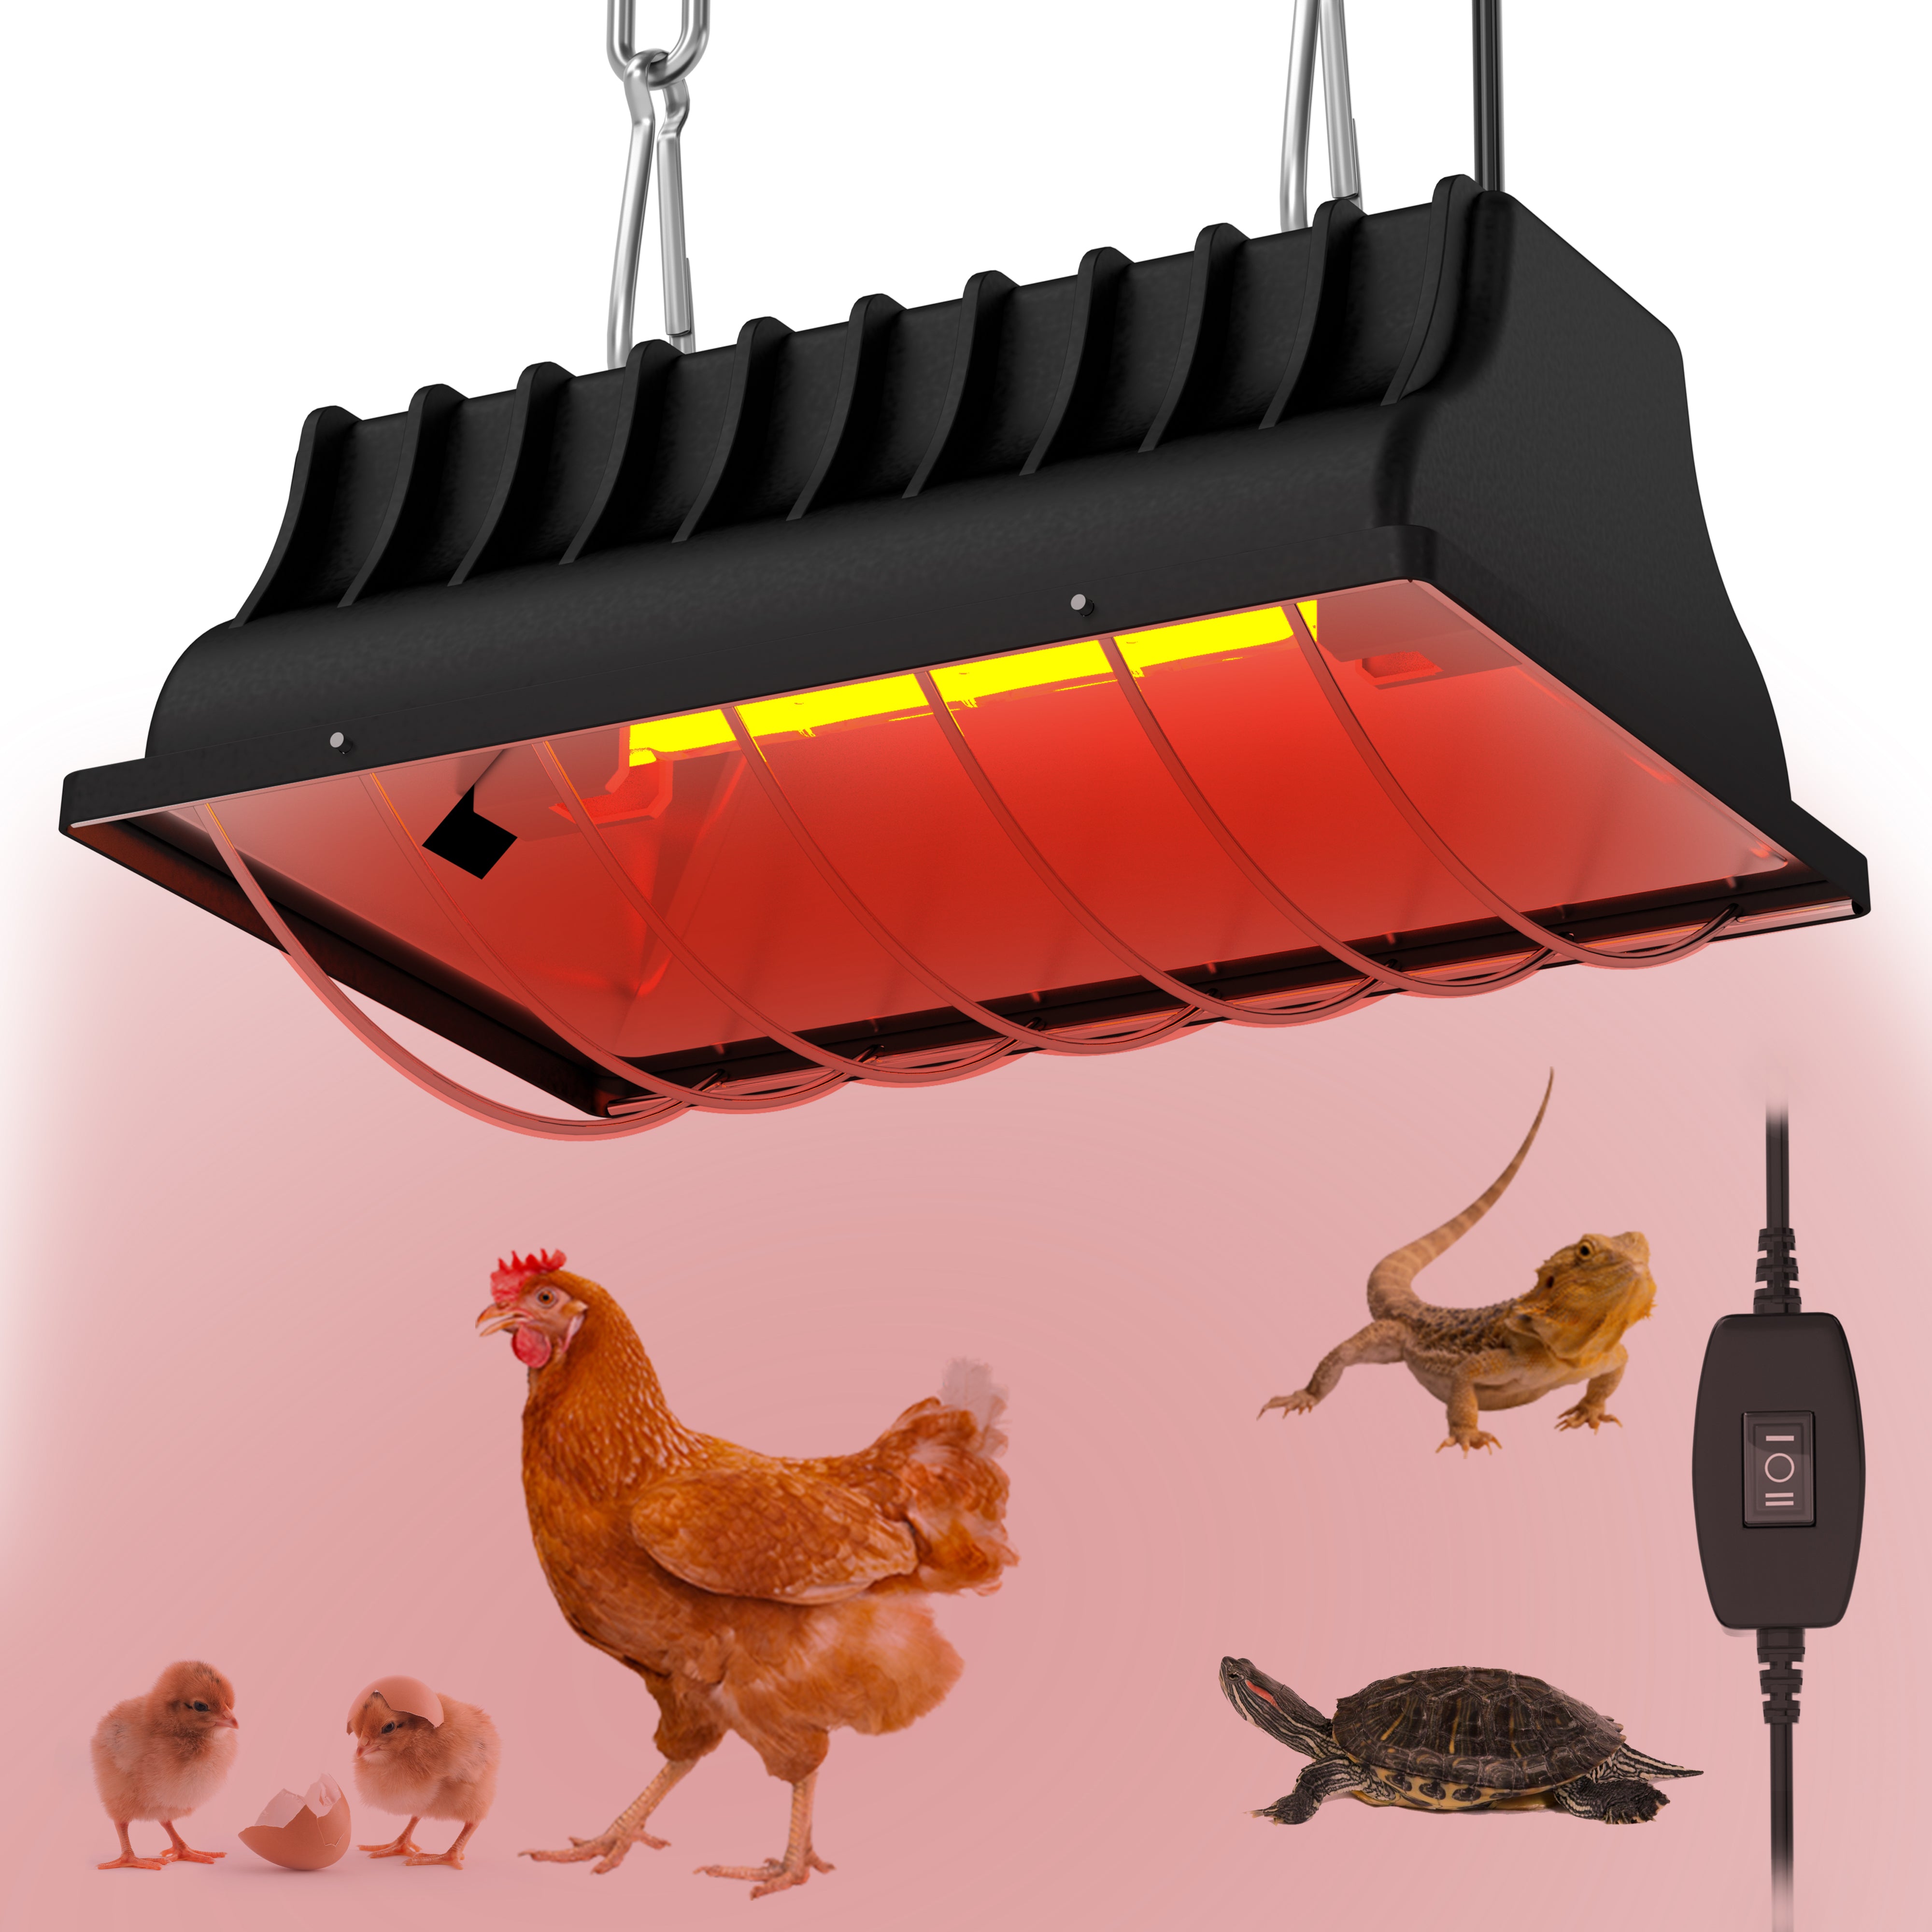 Chicken Coop Heater 250w Chicken Heater Heat Lamp Outdoor Hanging Light Heated with Waterproof and Anti-Fall Aluminum Alloy Lamp Shade